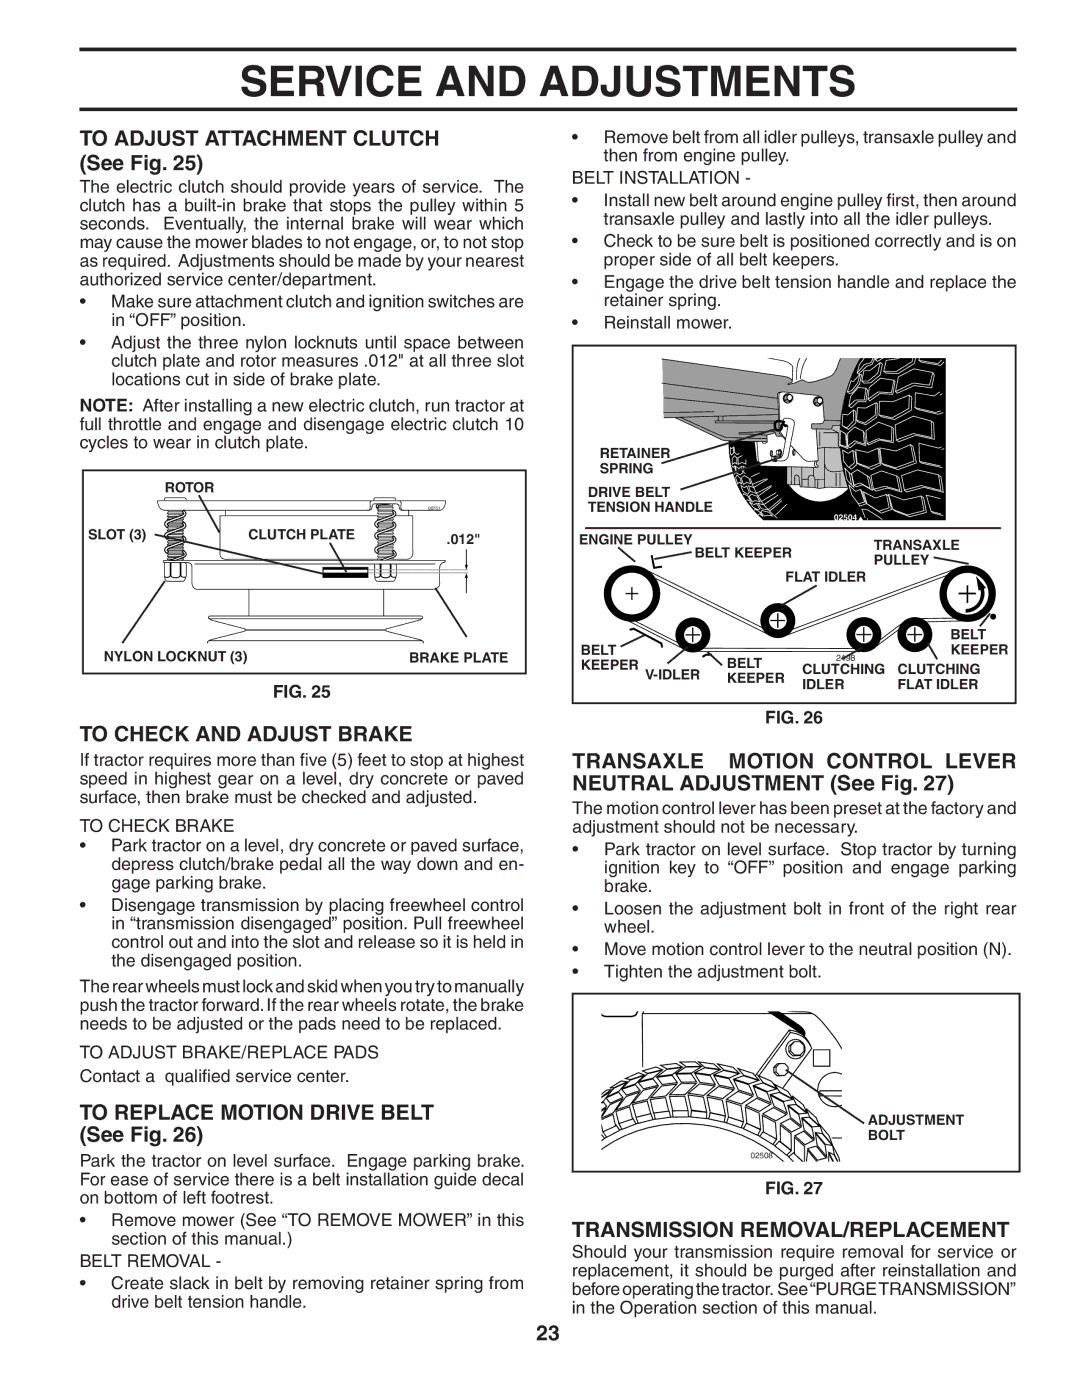 Poulan 195806 manual To Adjust Attachment Clutch See Fig, To Check and Adjust Brake, To Replace Motion Drive Belt See Fig 